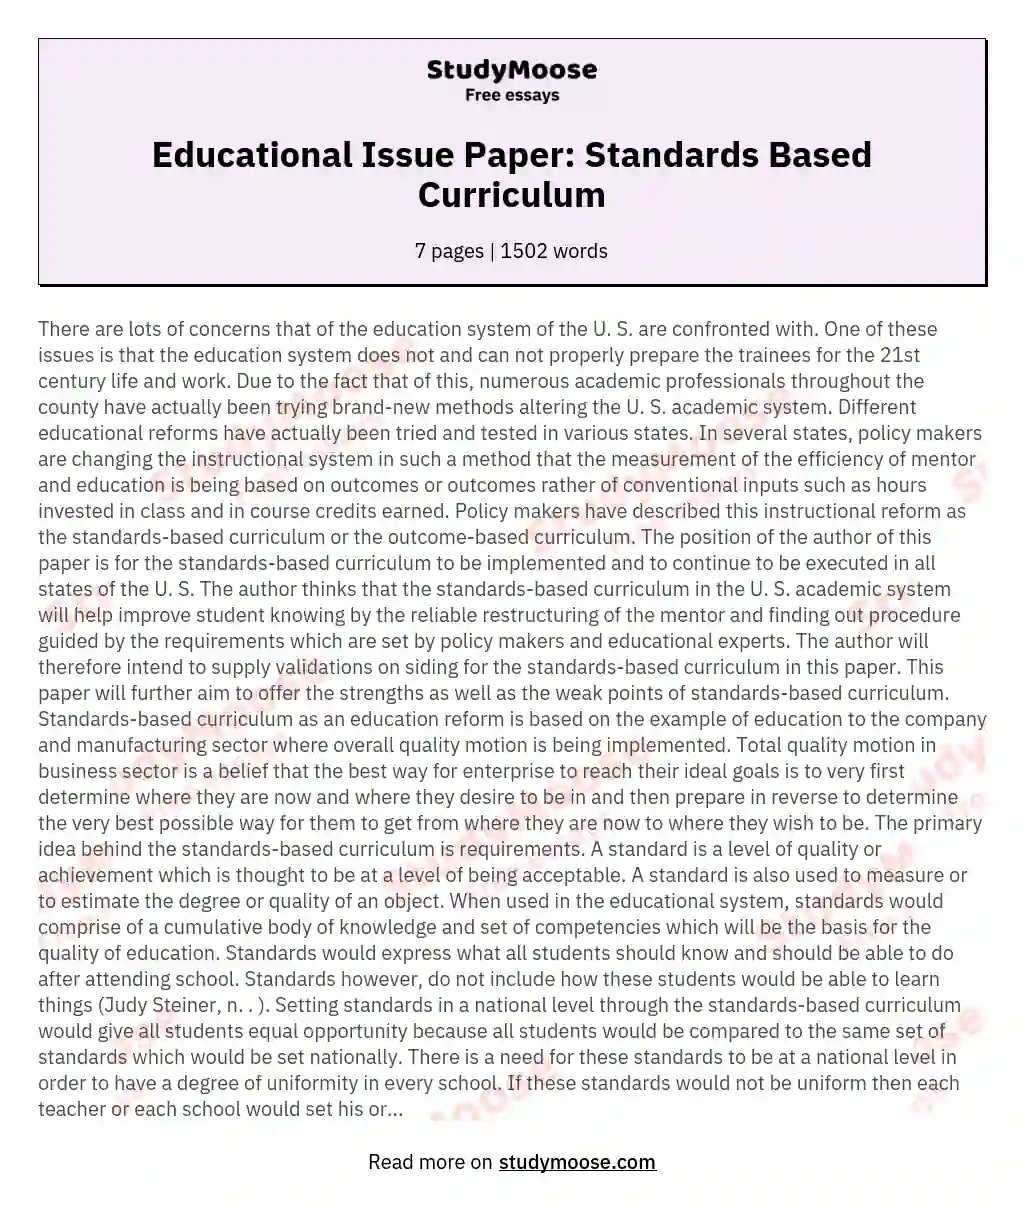 Educational Issue Paper: Standards Based Curriculum